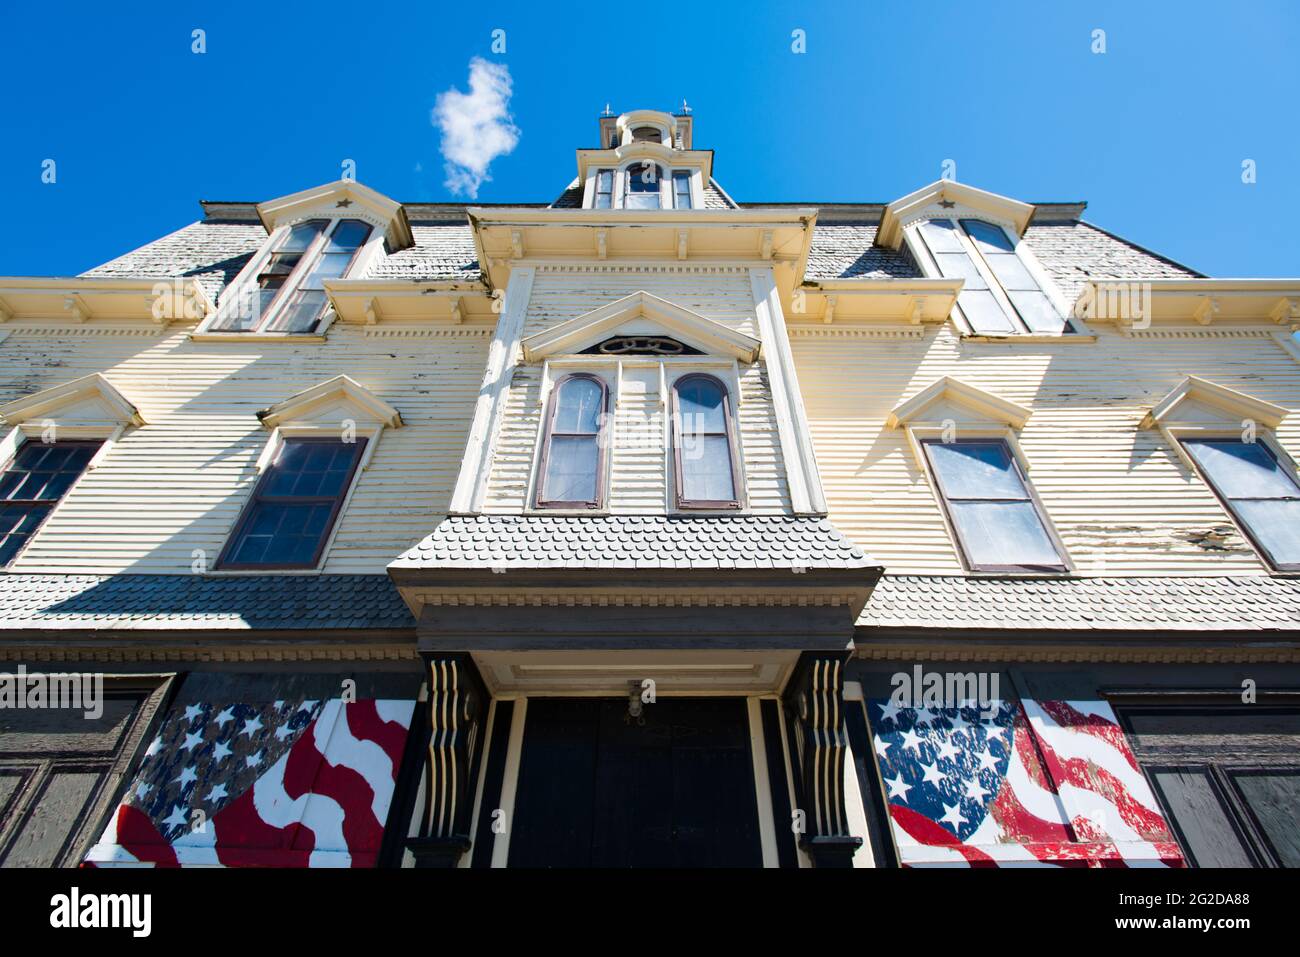 Star of Hope, Odd Fellows Lodge and Home of Artist Robert Indiana, Vinalhaven, Maine Stock Photo